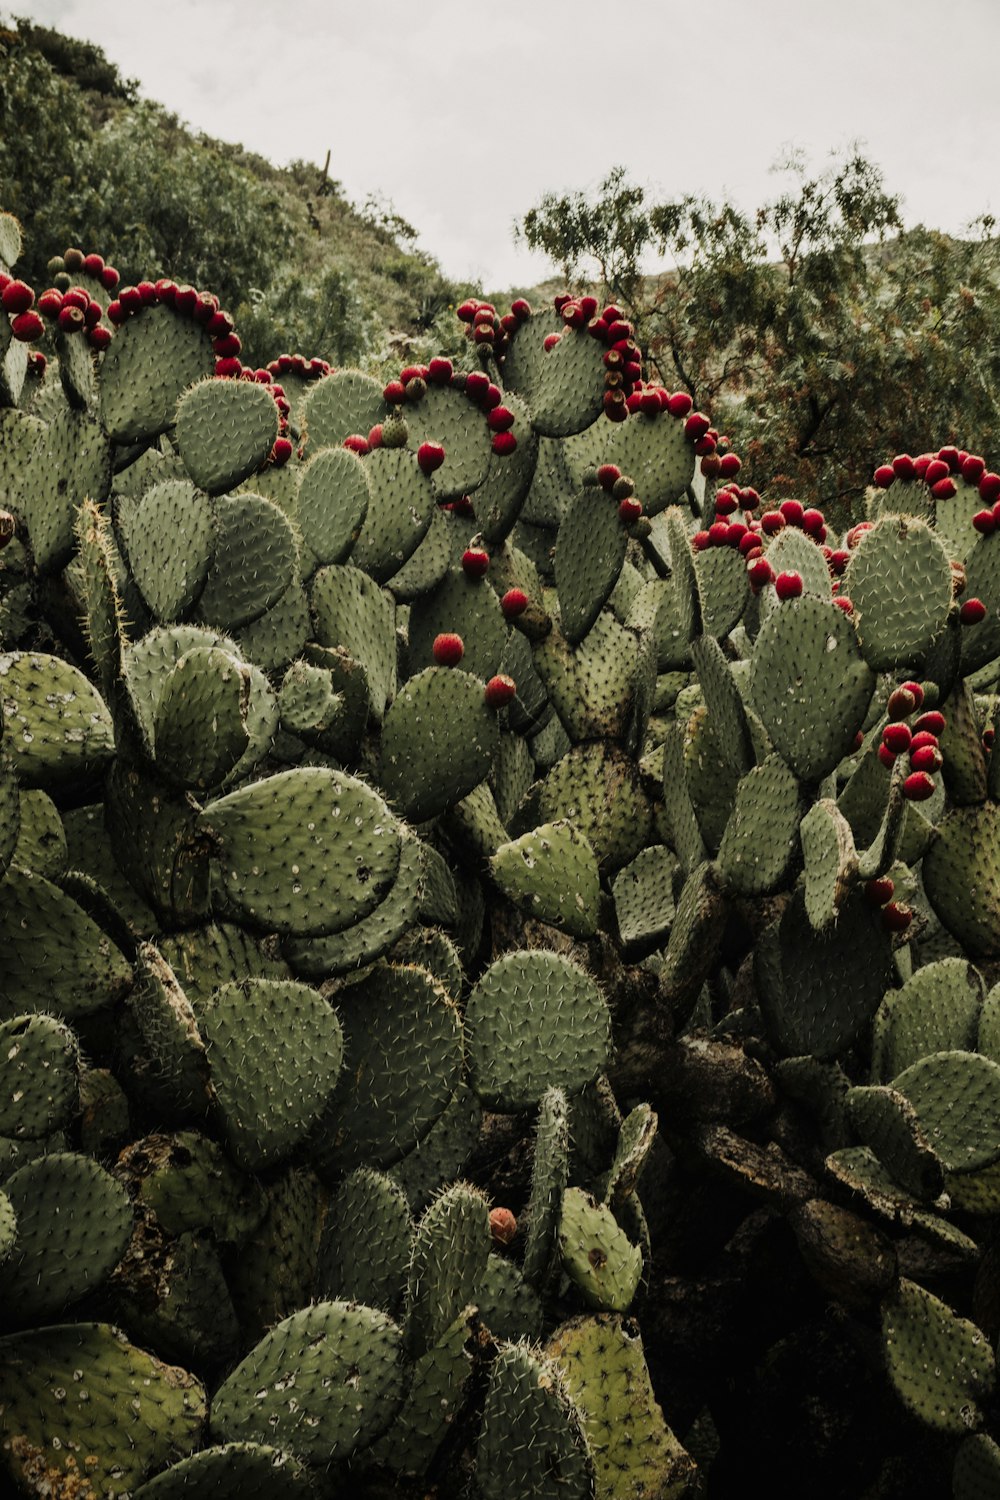 a large group of cactus plants with red berries on them